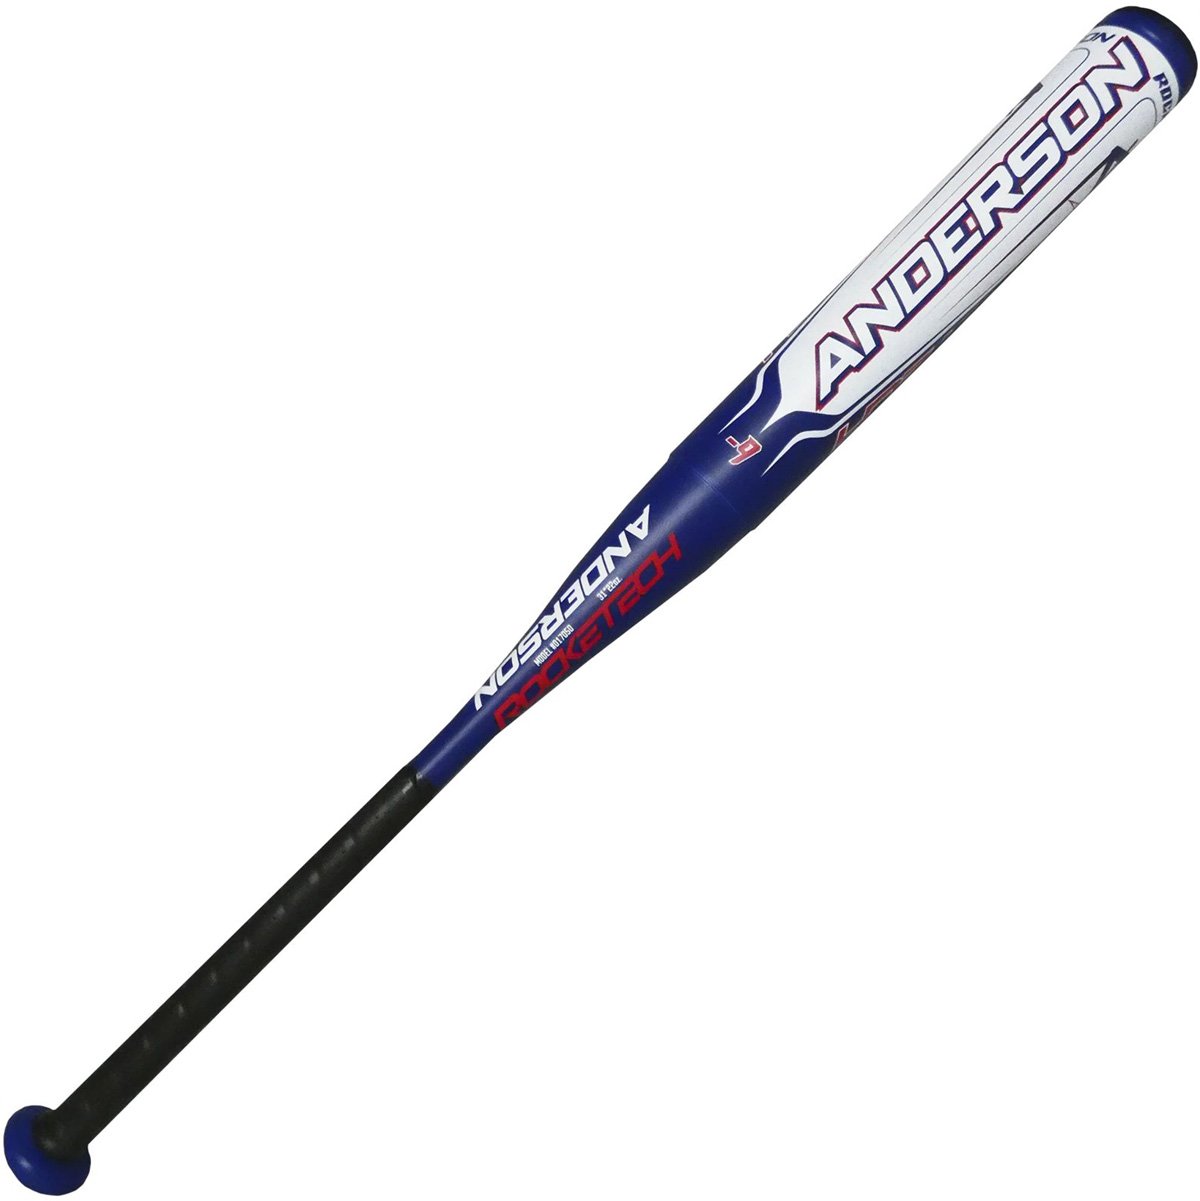 anderson-rocketech-2022-fastpitch-9-softball-bat-33-inch-24-oz 017050-3324 Anderson 854378000656 The Anderson Rocketech has spent almost two decades dominating the fastpitch